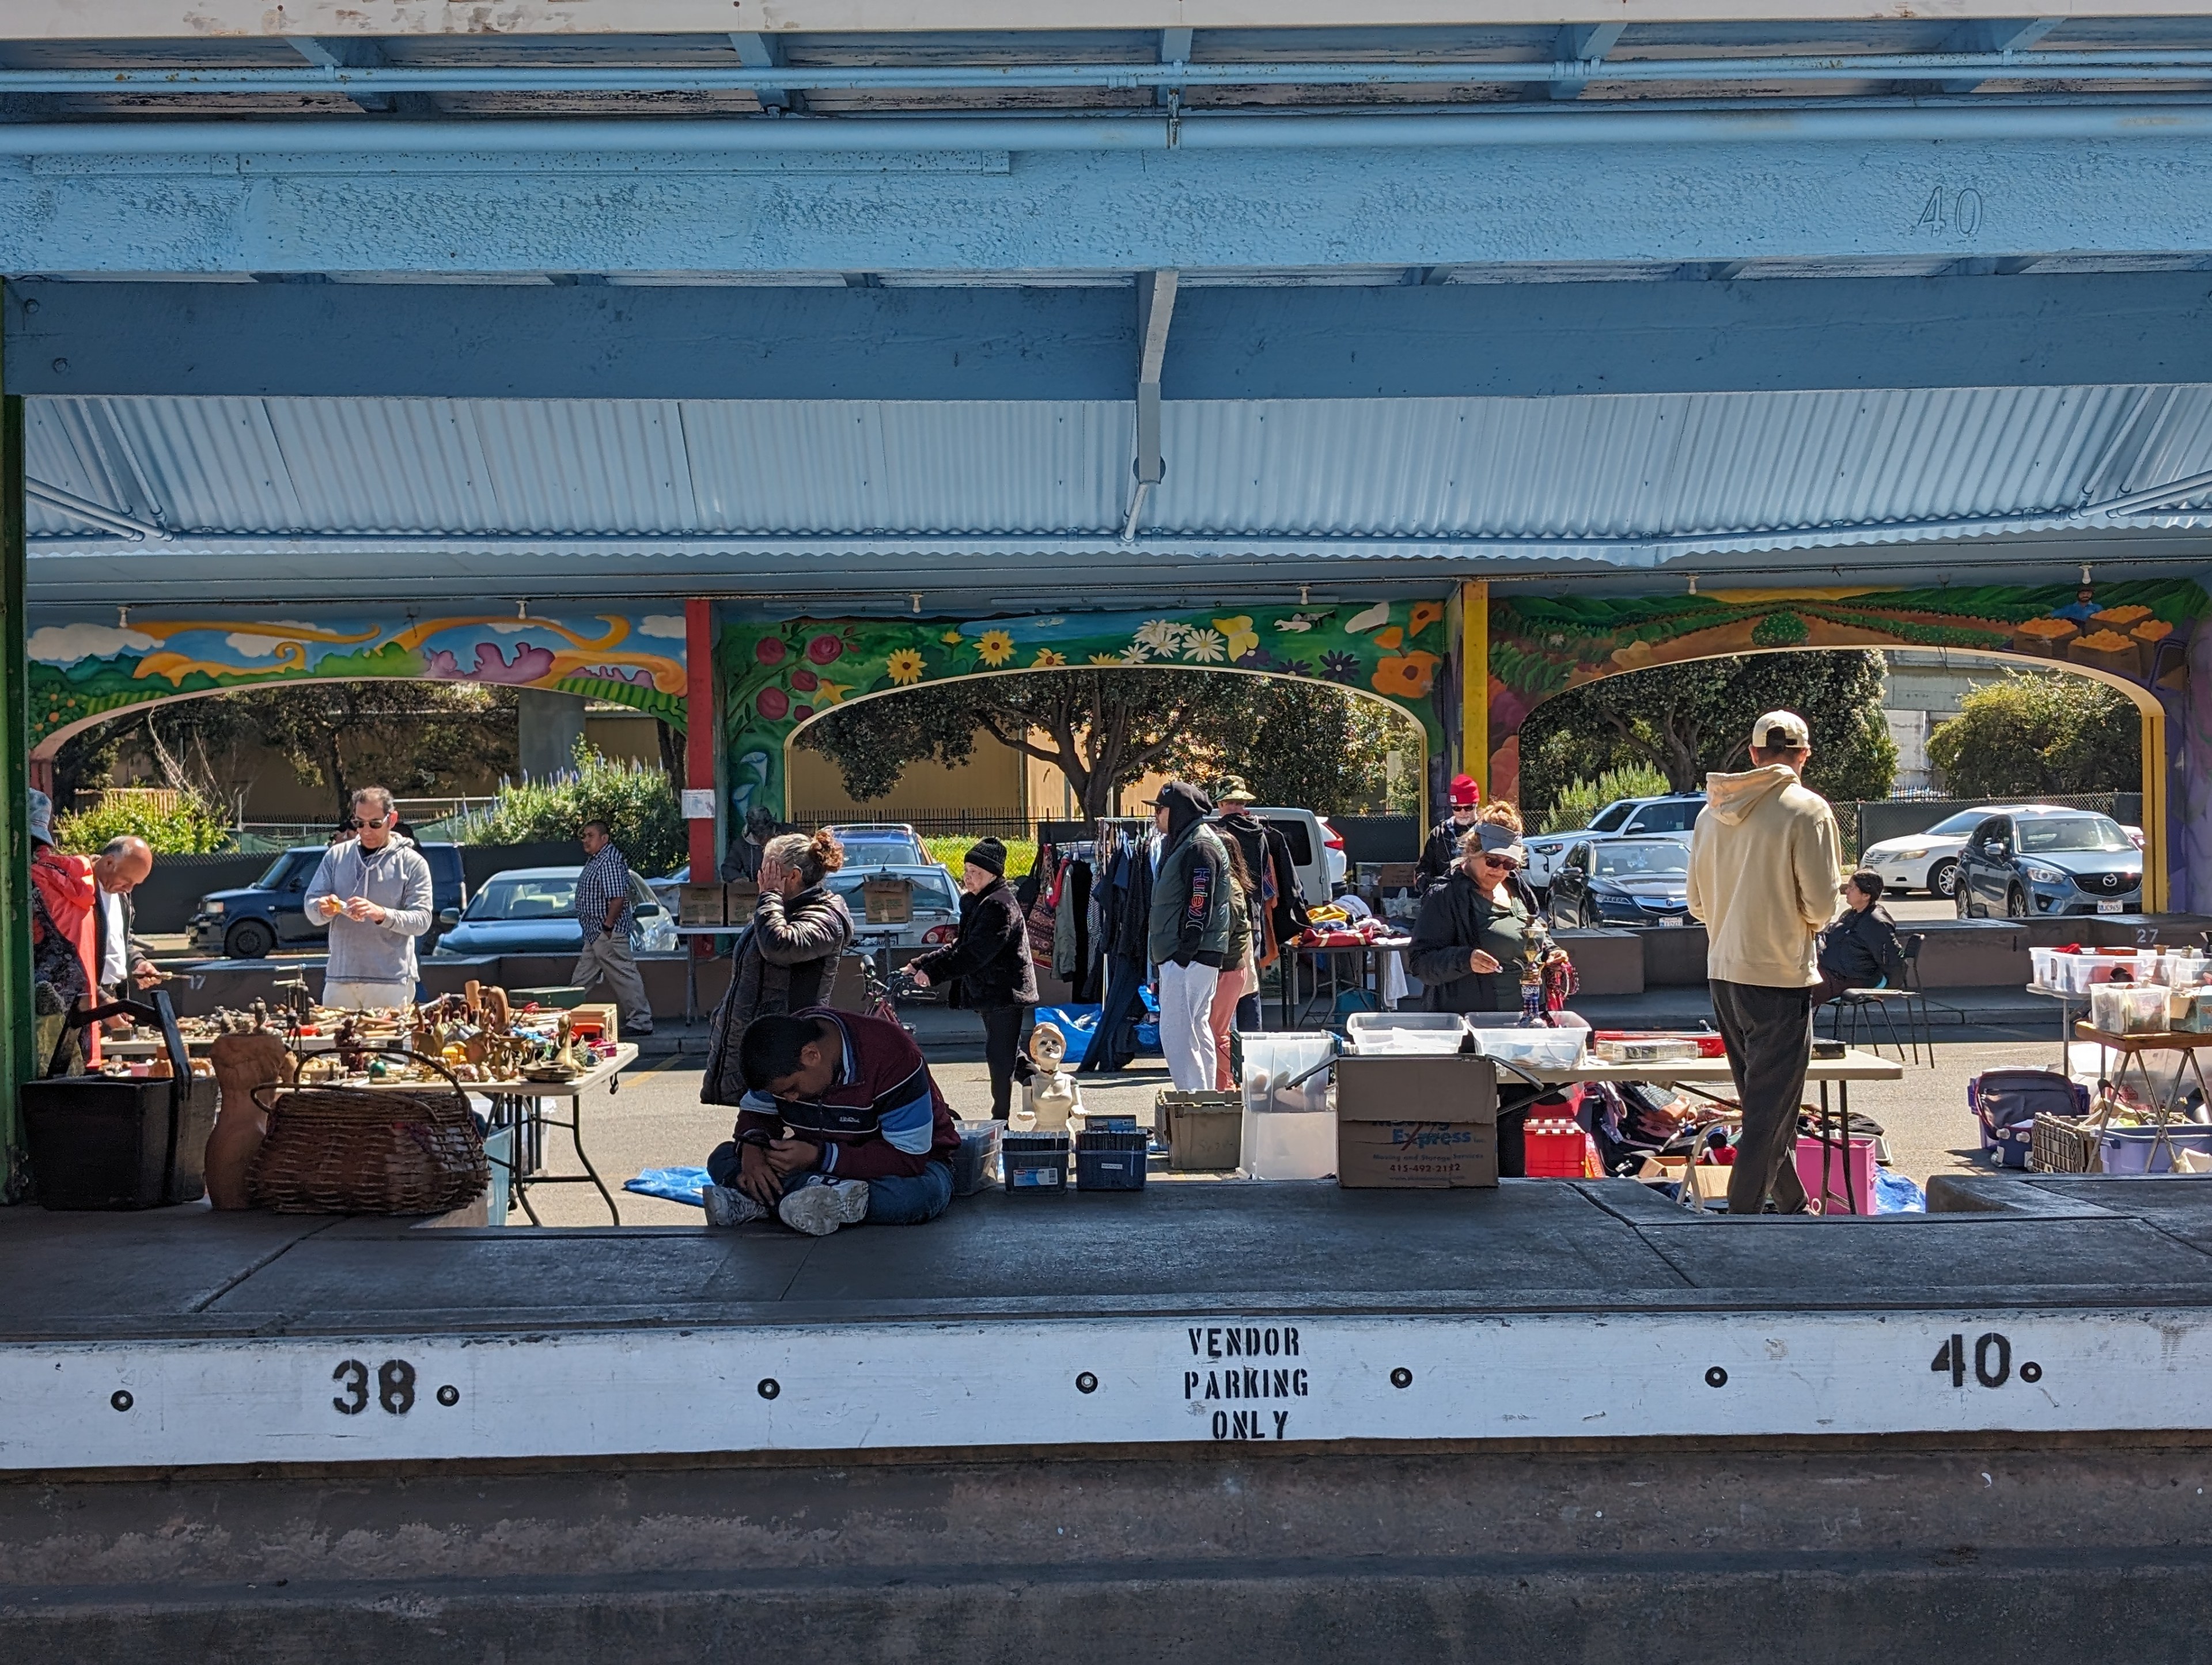 Vendors sell goods at a farmers market parking lot in sunshine.